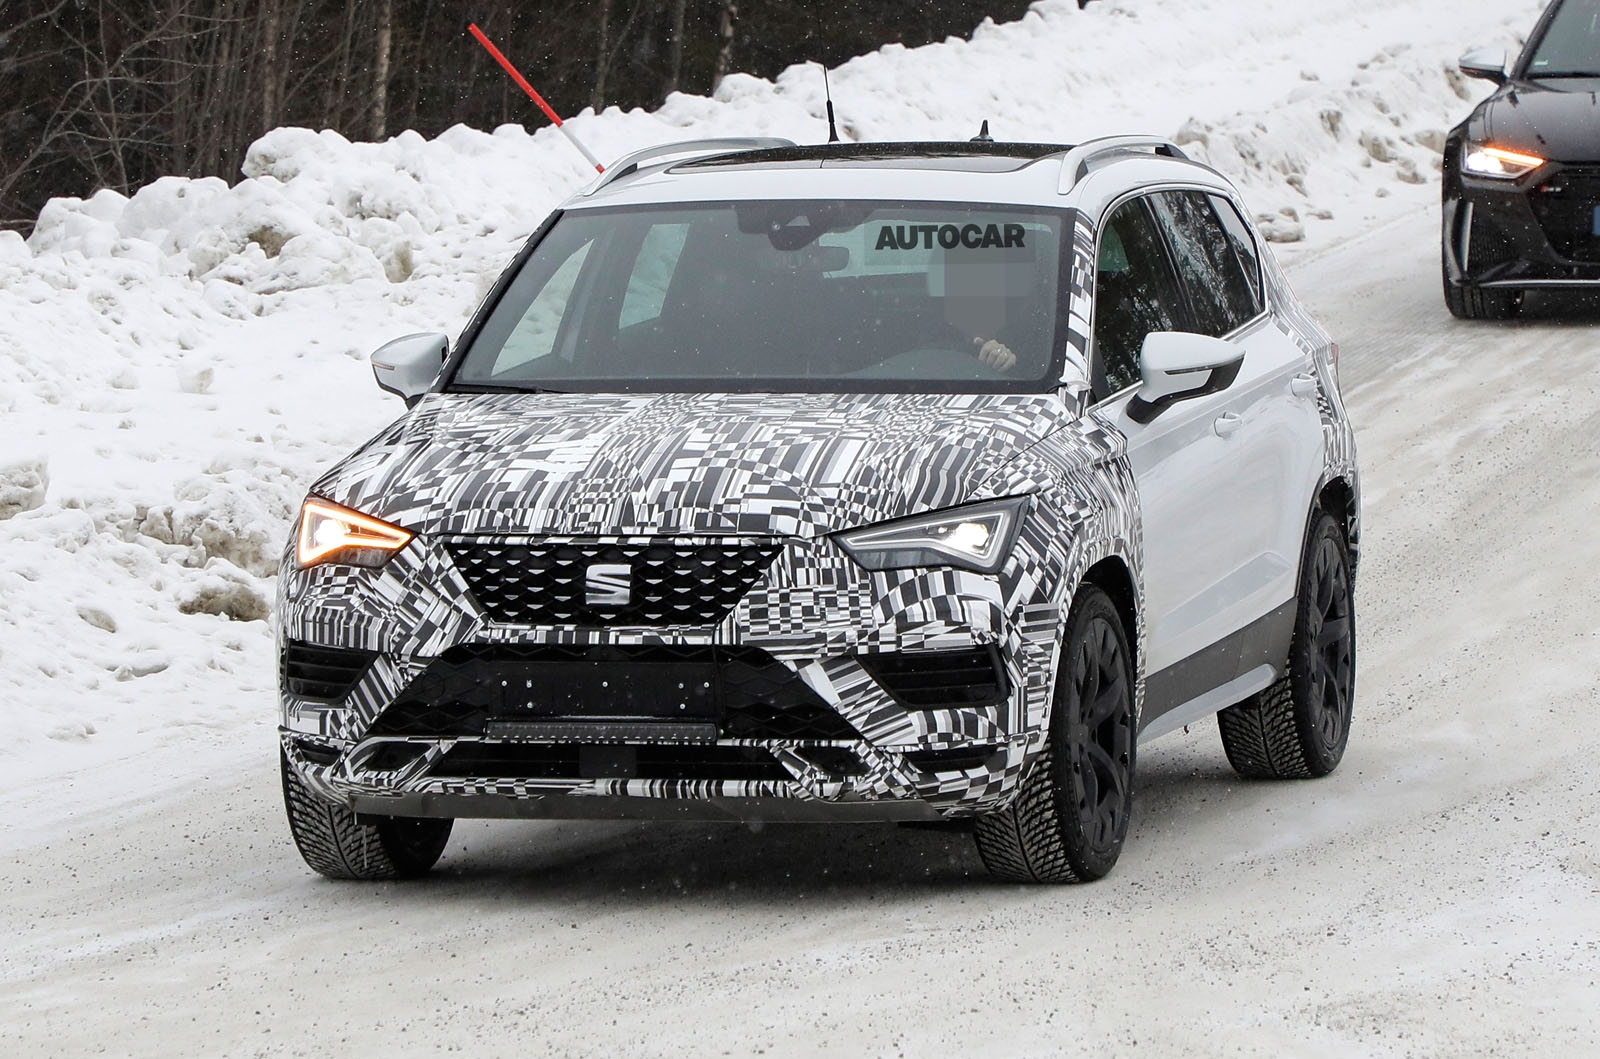 2021 SEAT Ateca Facelift Revealed With Rugged Xperience Trim